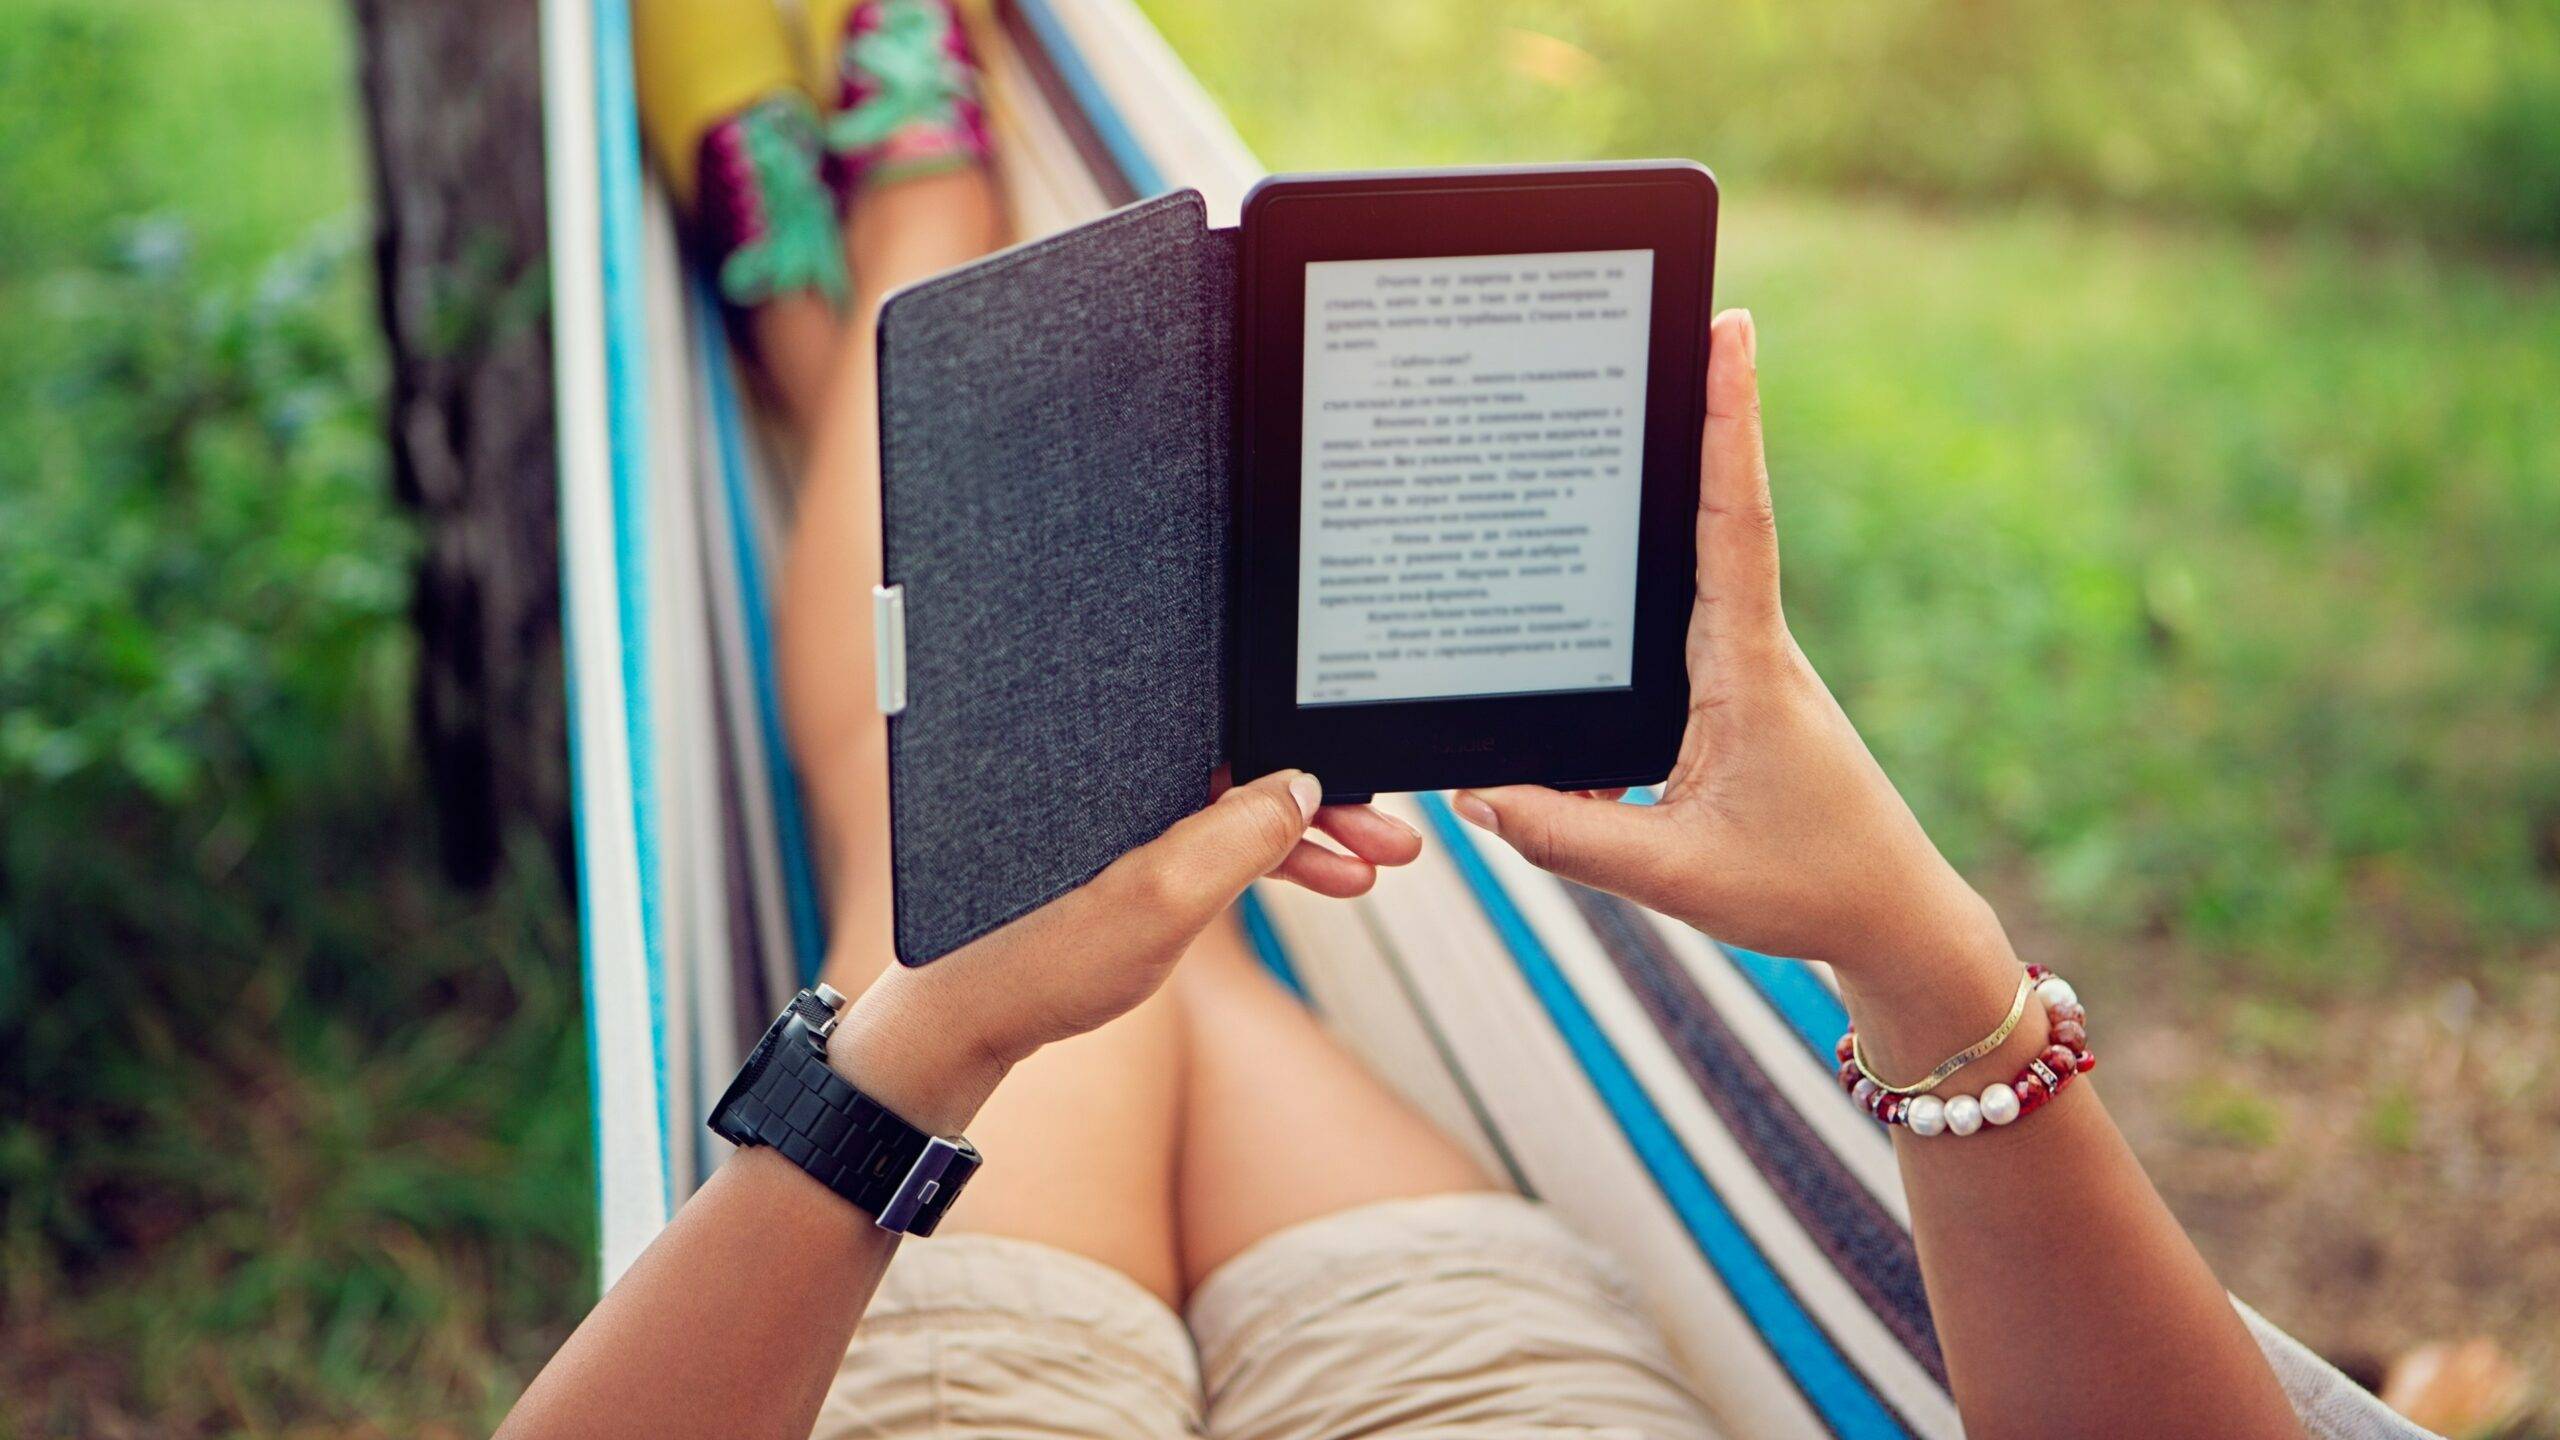 Discover the latest trends in ebook usage and material spending based on research from PEW, Library Journal and ALA.